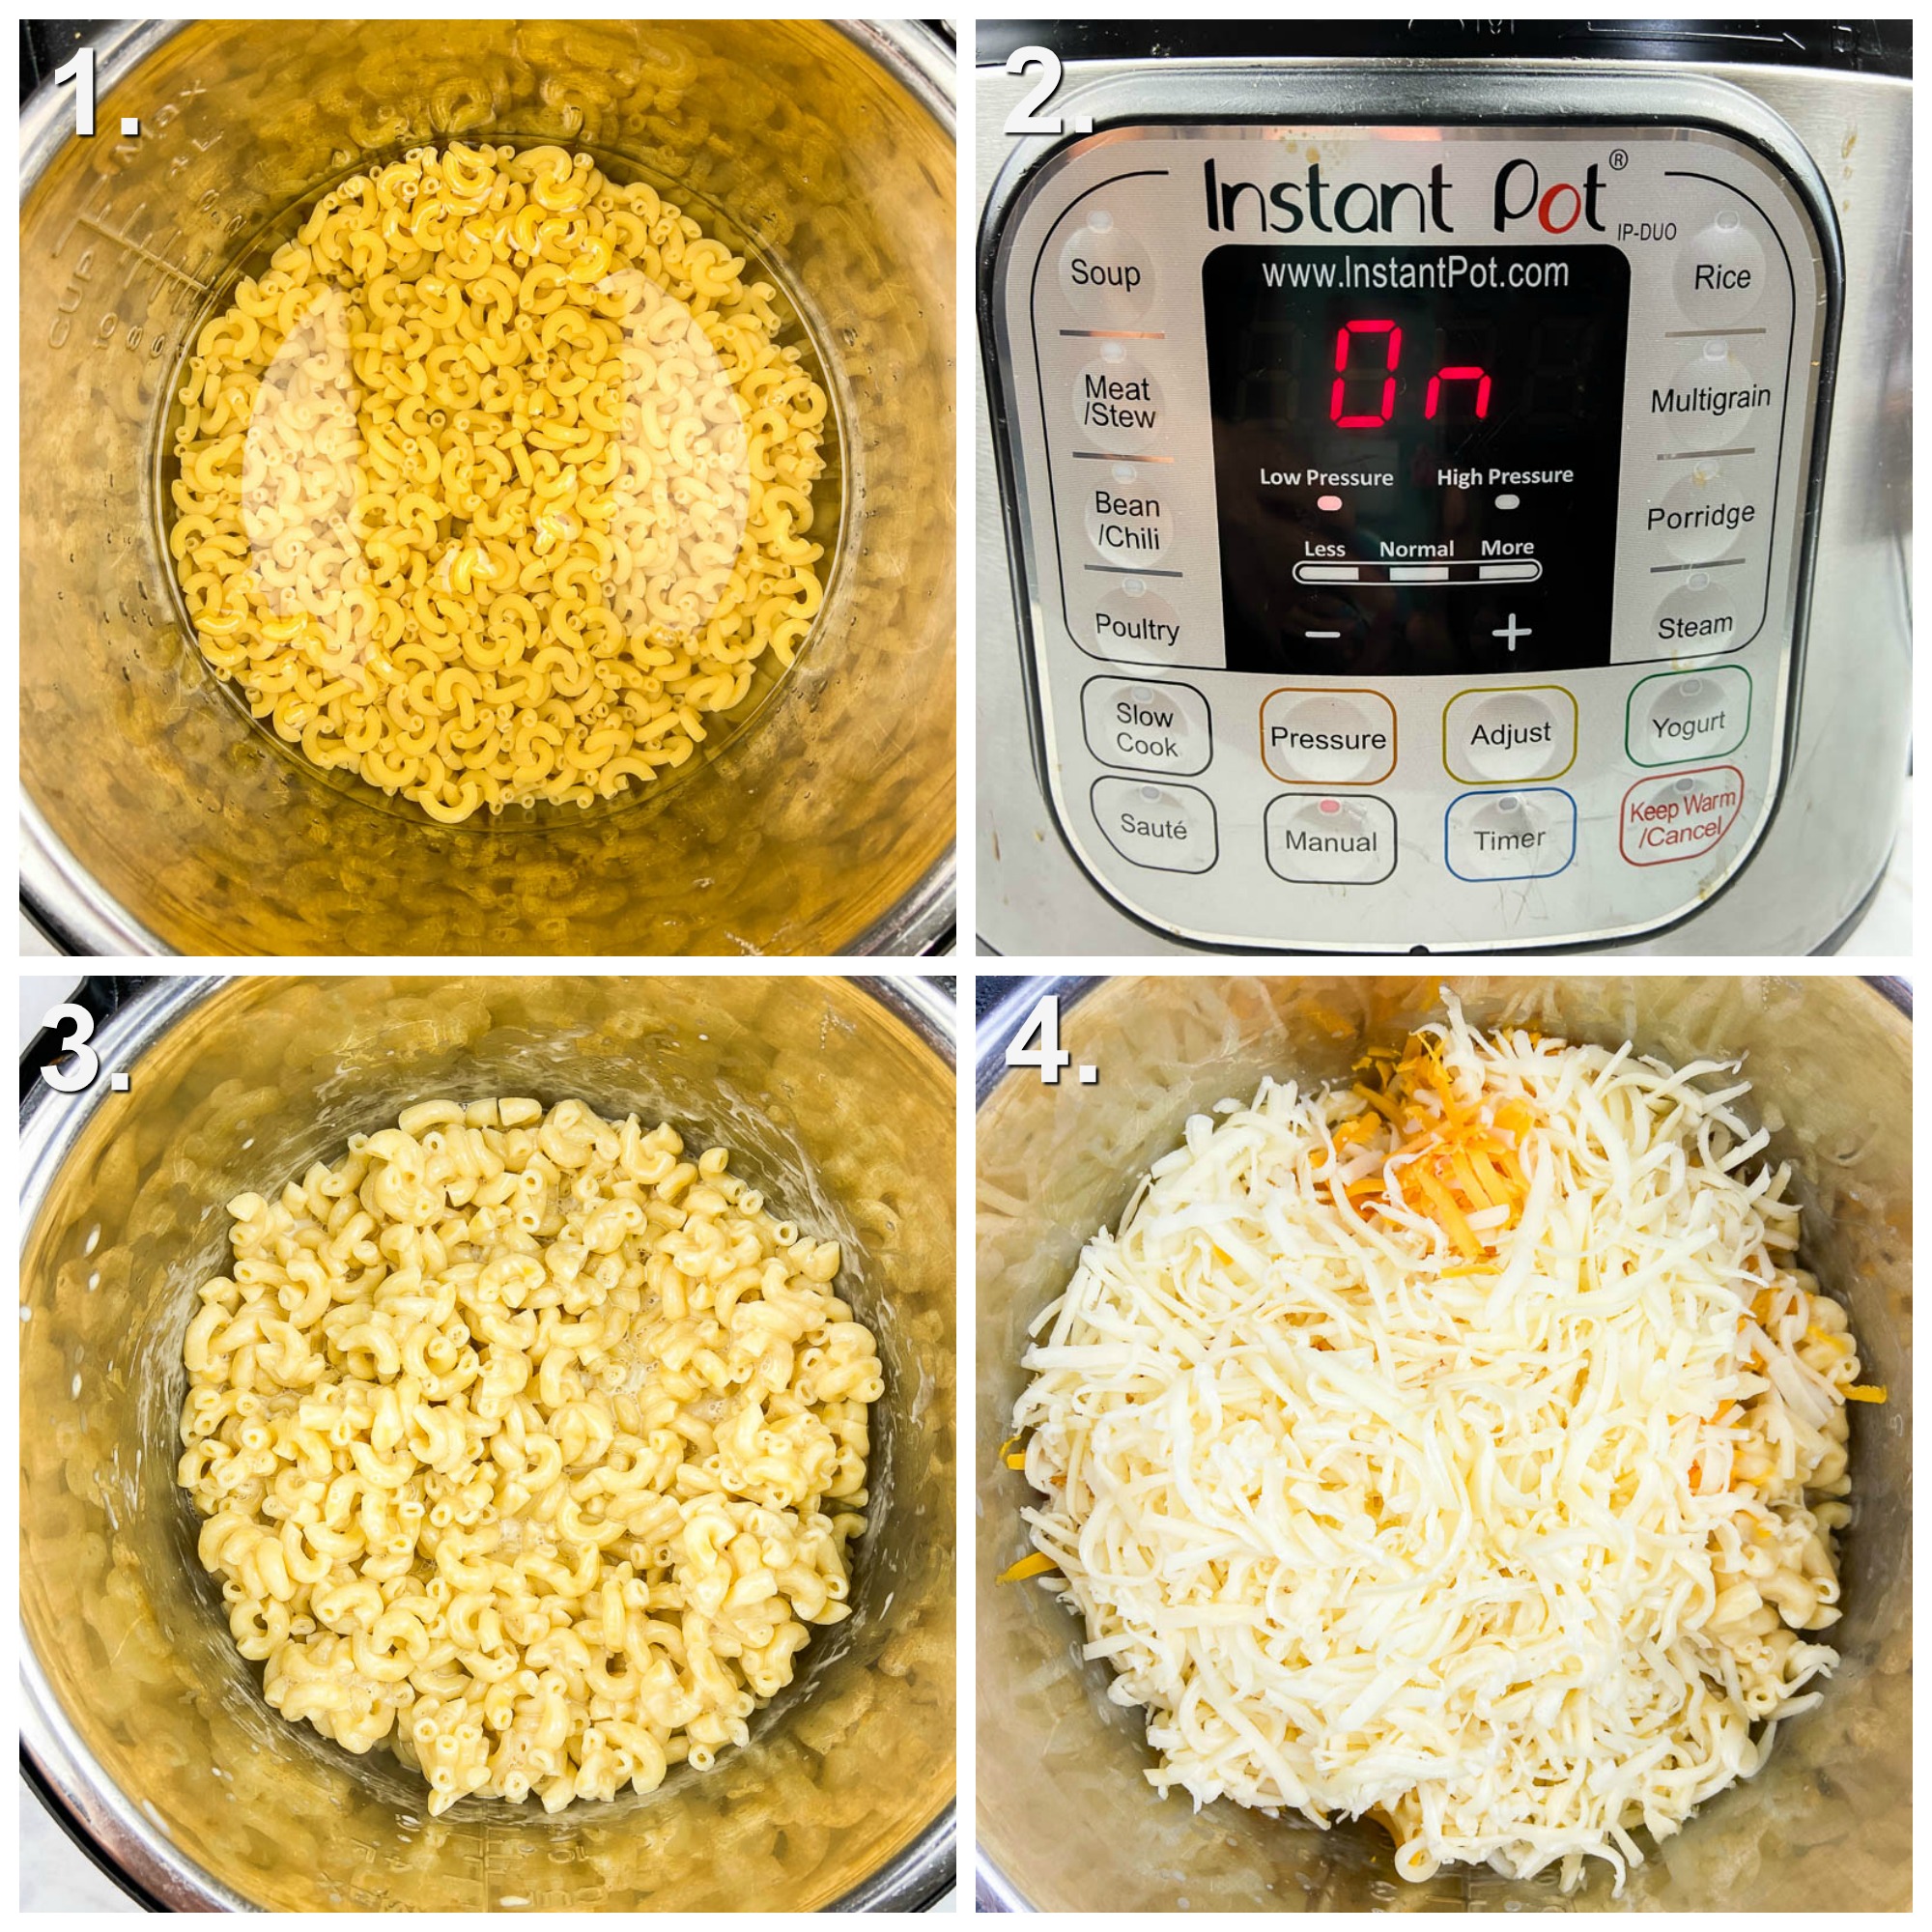 Step by Step Photos for how to make instant pot mac and cheese. Photo 1 cooking pasta in instant pot. Photo 2: Instant Pot on Photo 3: cooked macaroni Photo 4: Cheese on macaroni in instant pot 